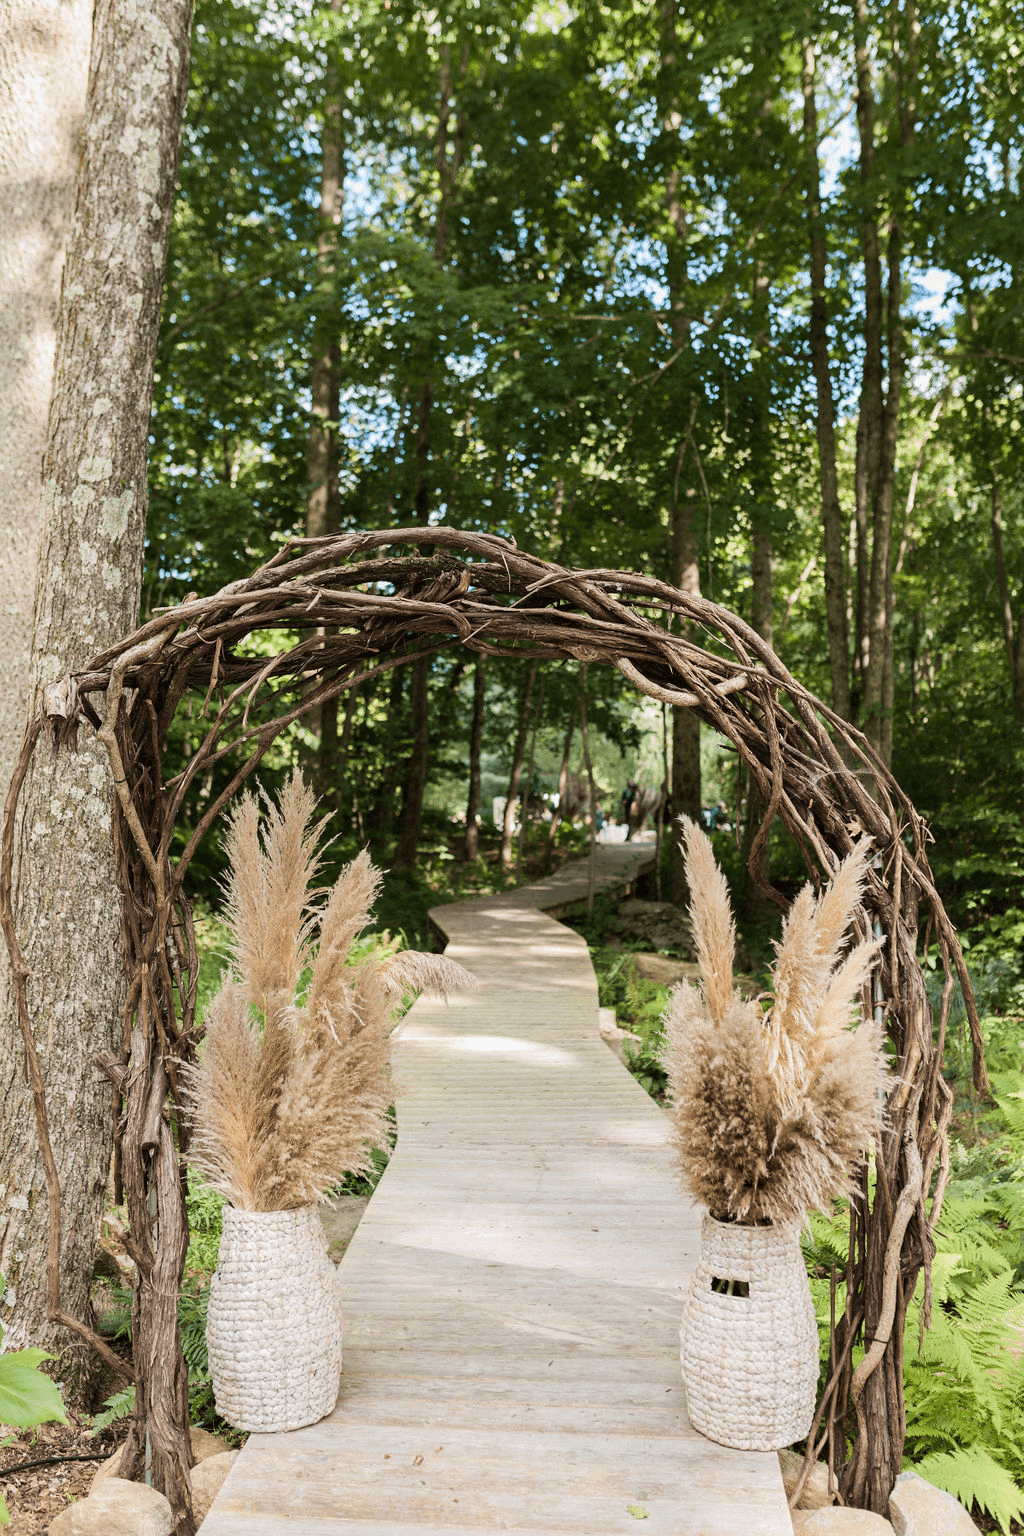 An outdoor walkway with wooden arch